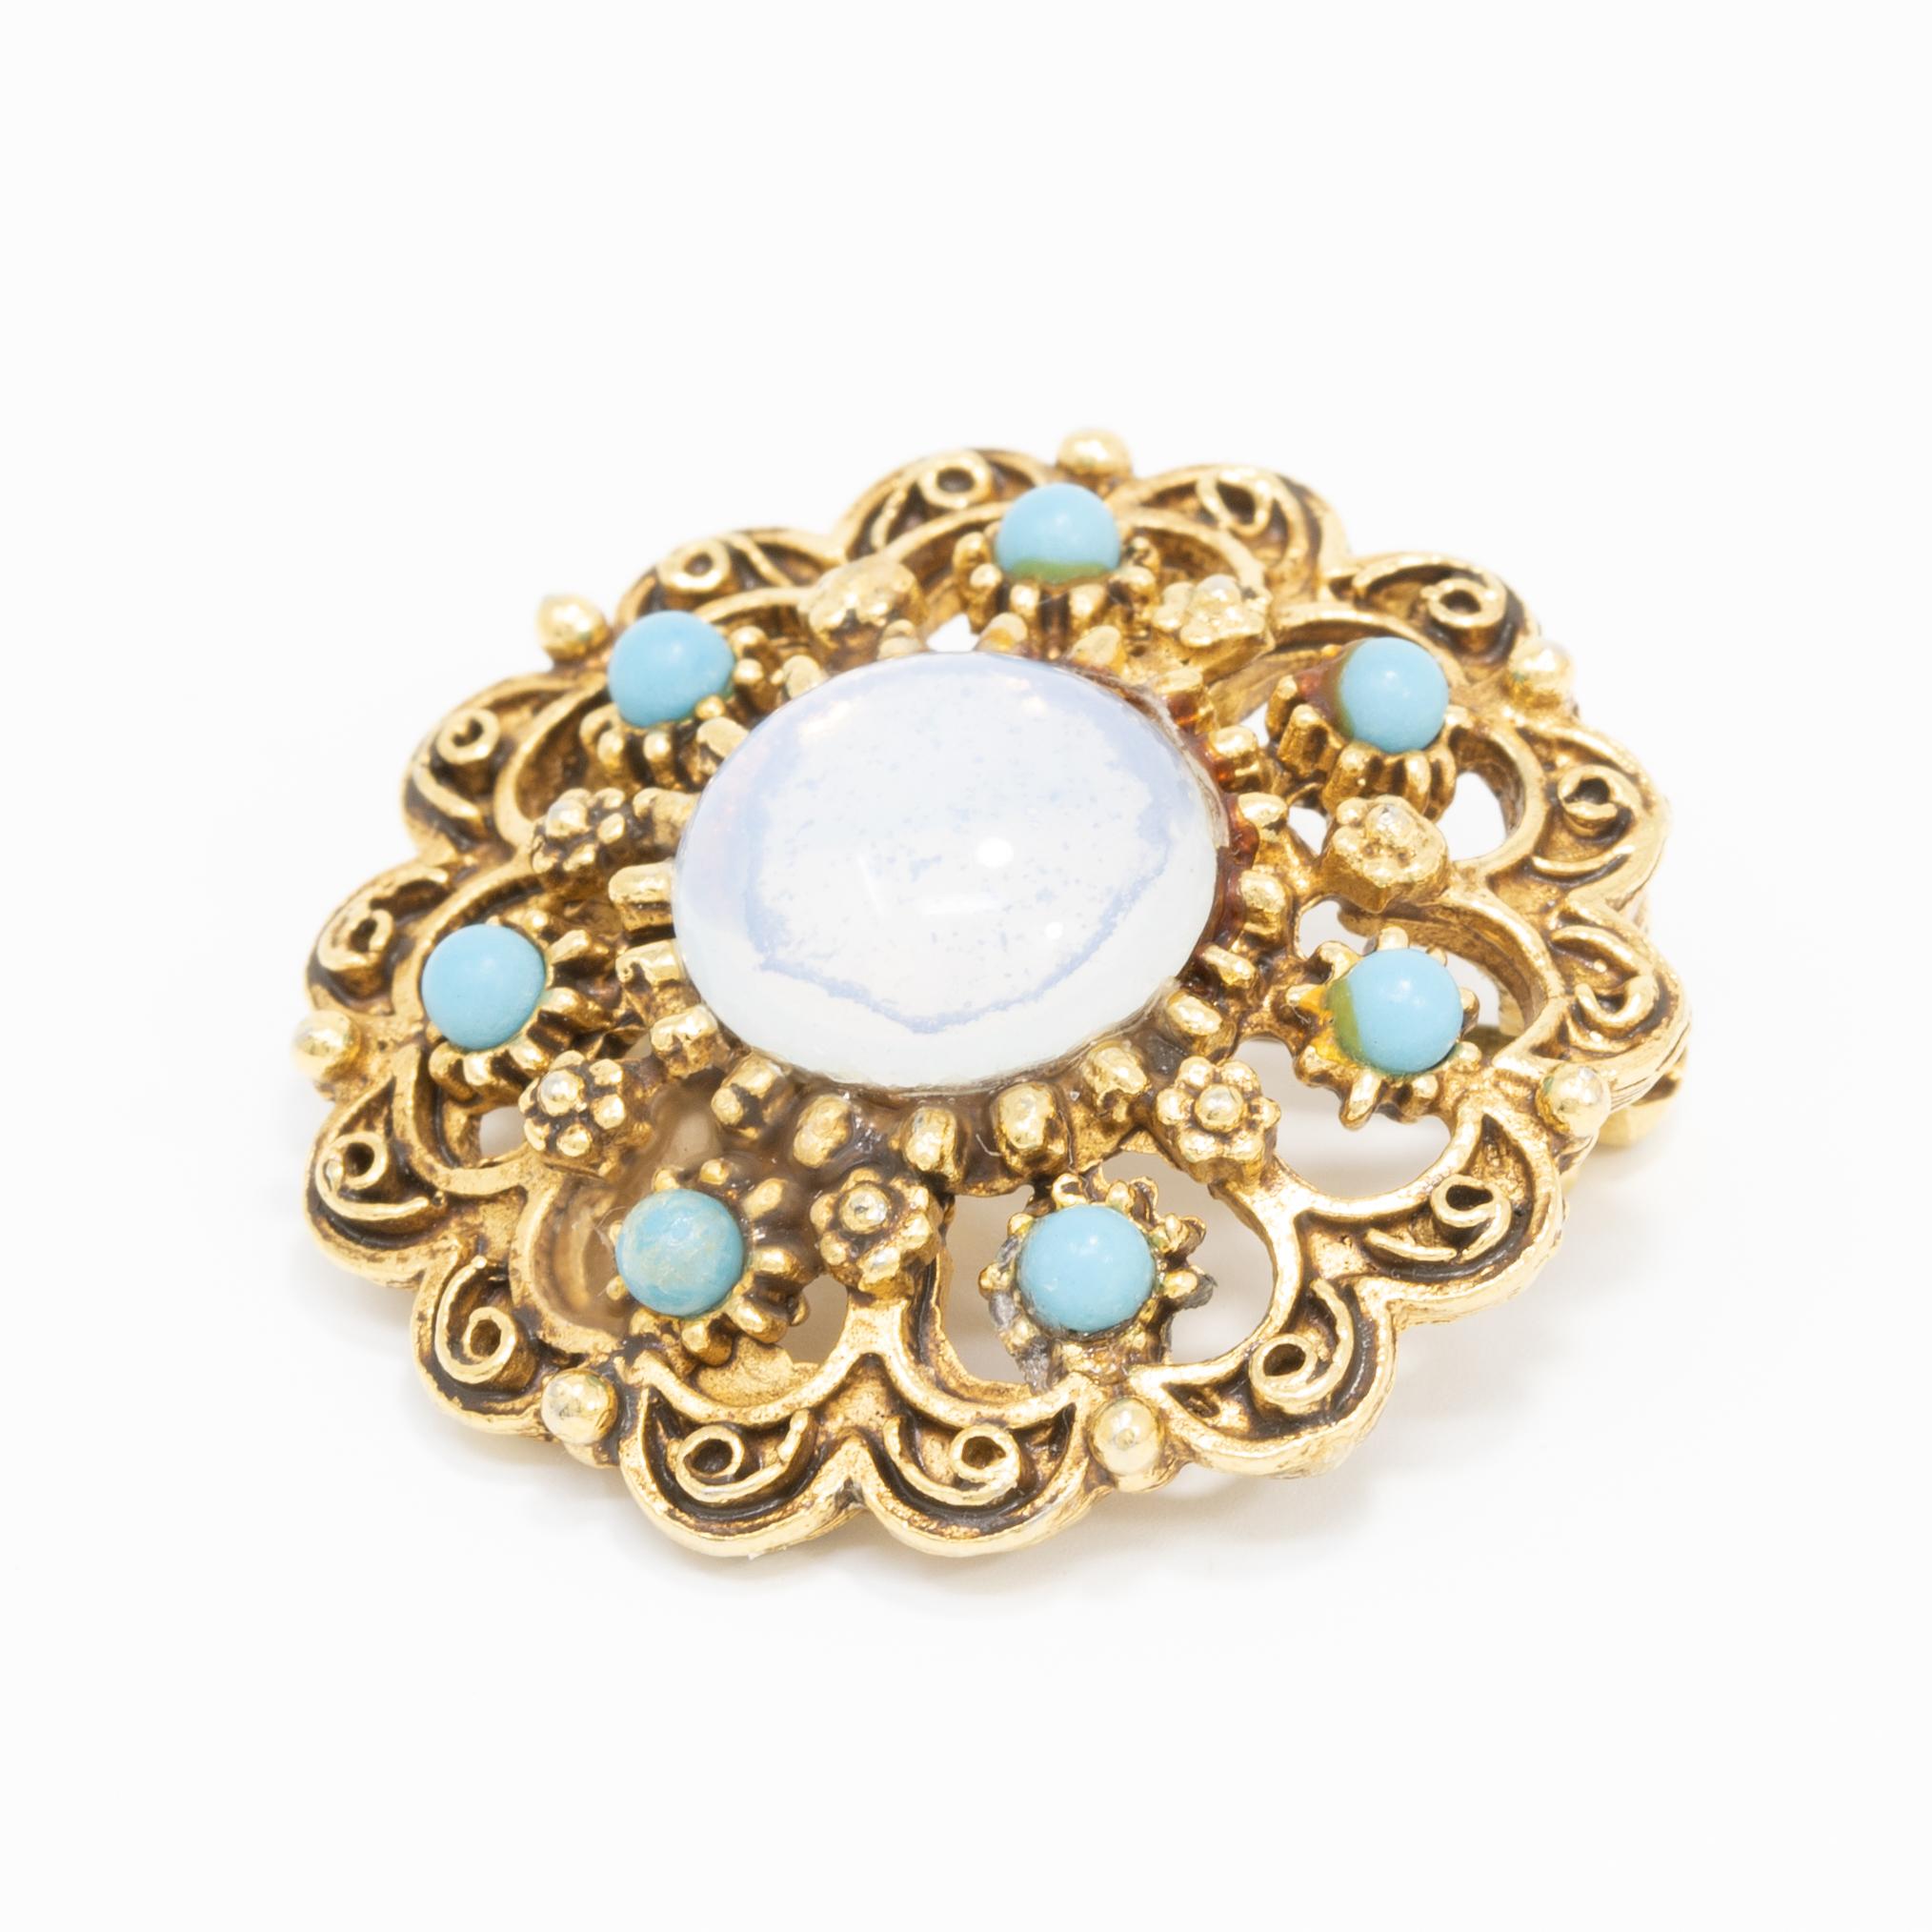 A vintage, Victorian-style cameo. A centerpiece moon-glow cabochon is set in a gold-plated decorative setting, accented with turquoise-colored beads.

Gold plated.

Marks / Hallmarks: Florenza